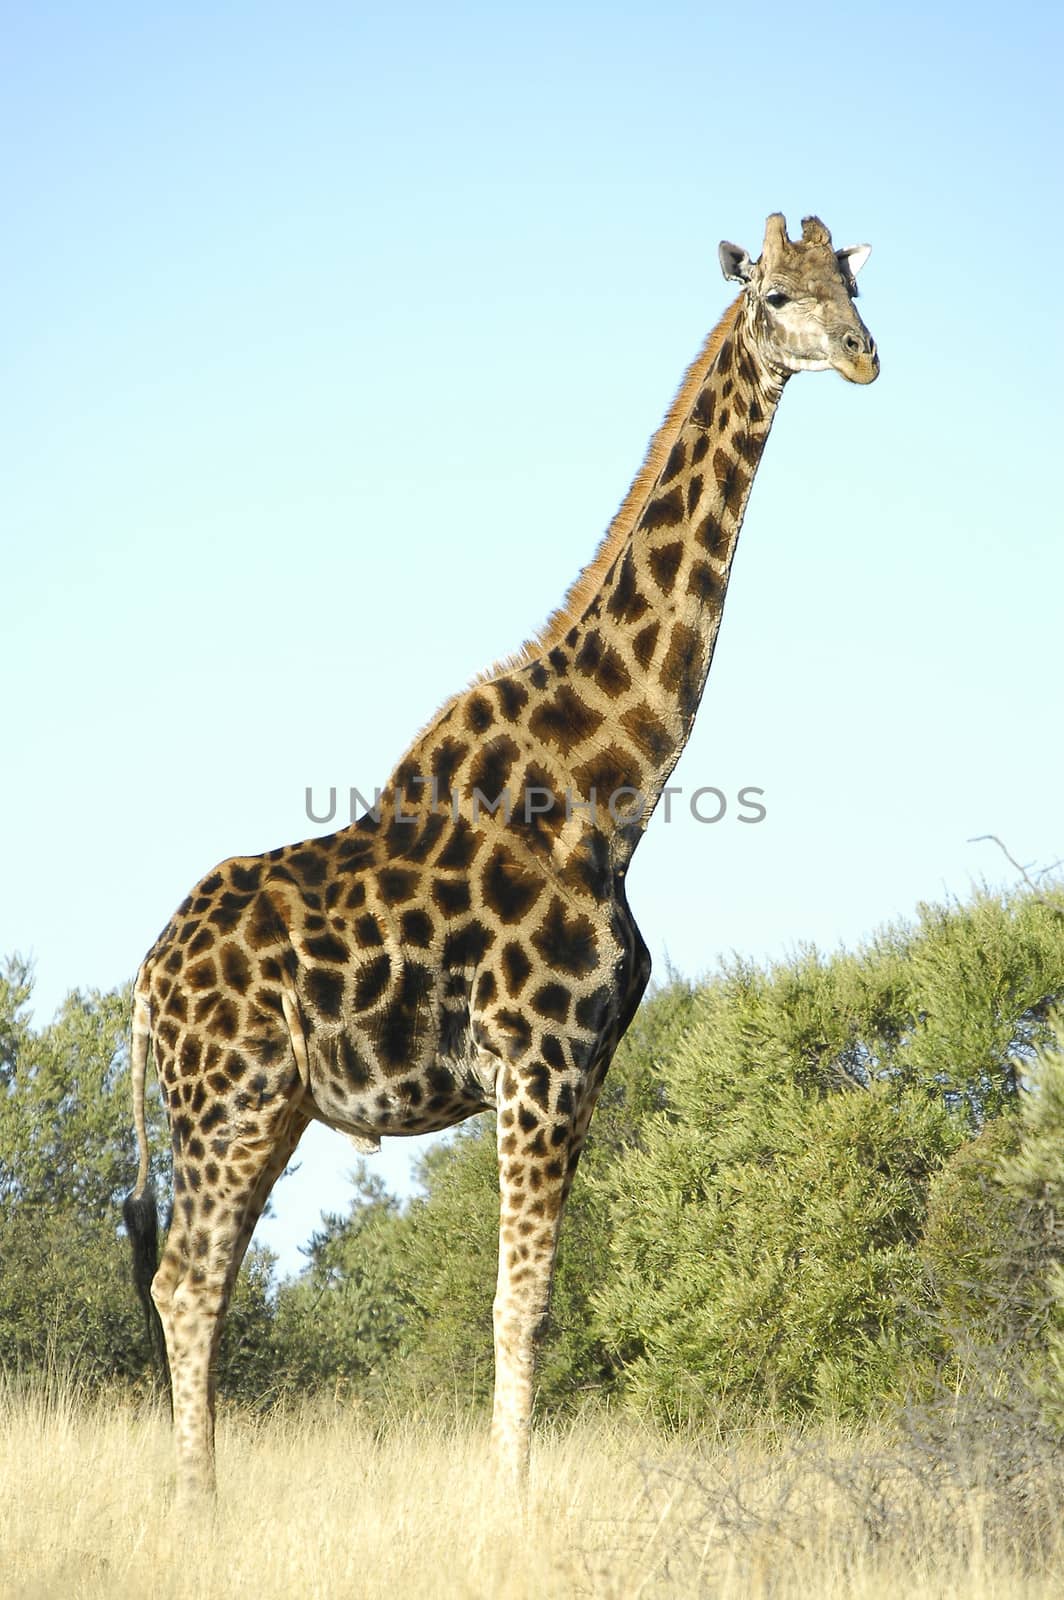 Giraffe, Franklin Nature Reserve on Naval Hill in Bloemfontein, South Africa